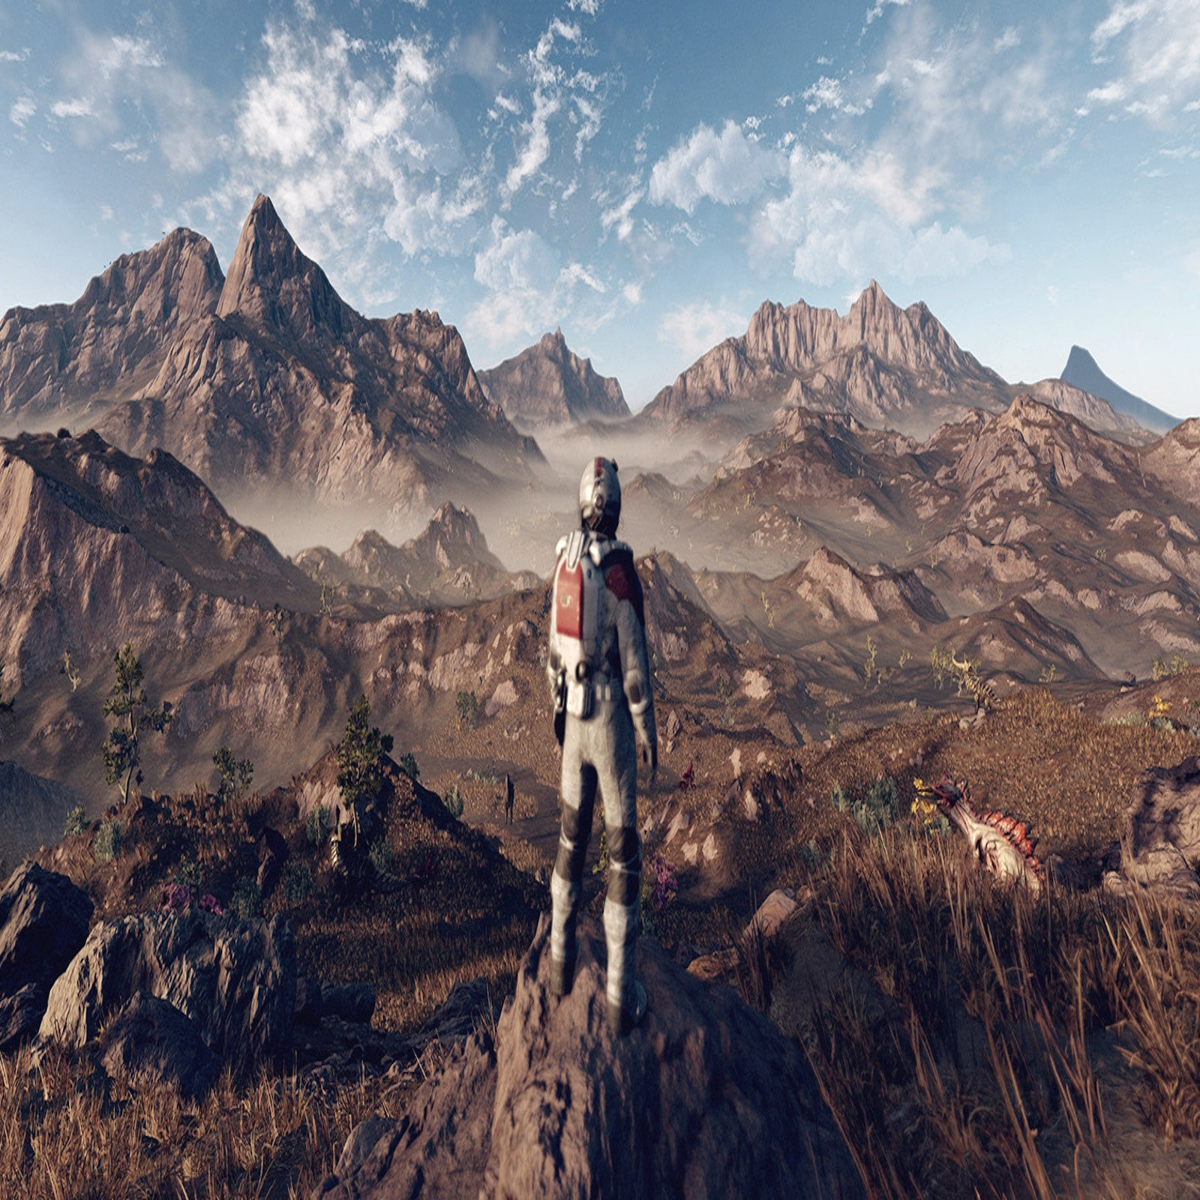 Starfield review concerns raised as Bethesda withholds copies from